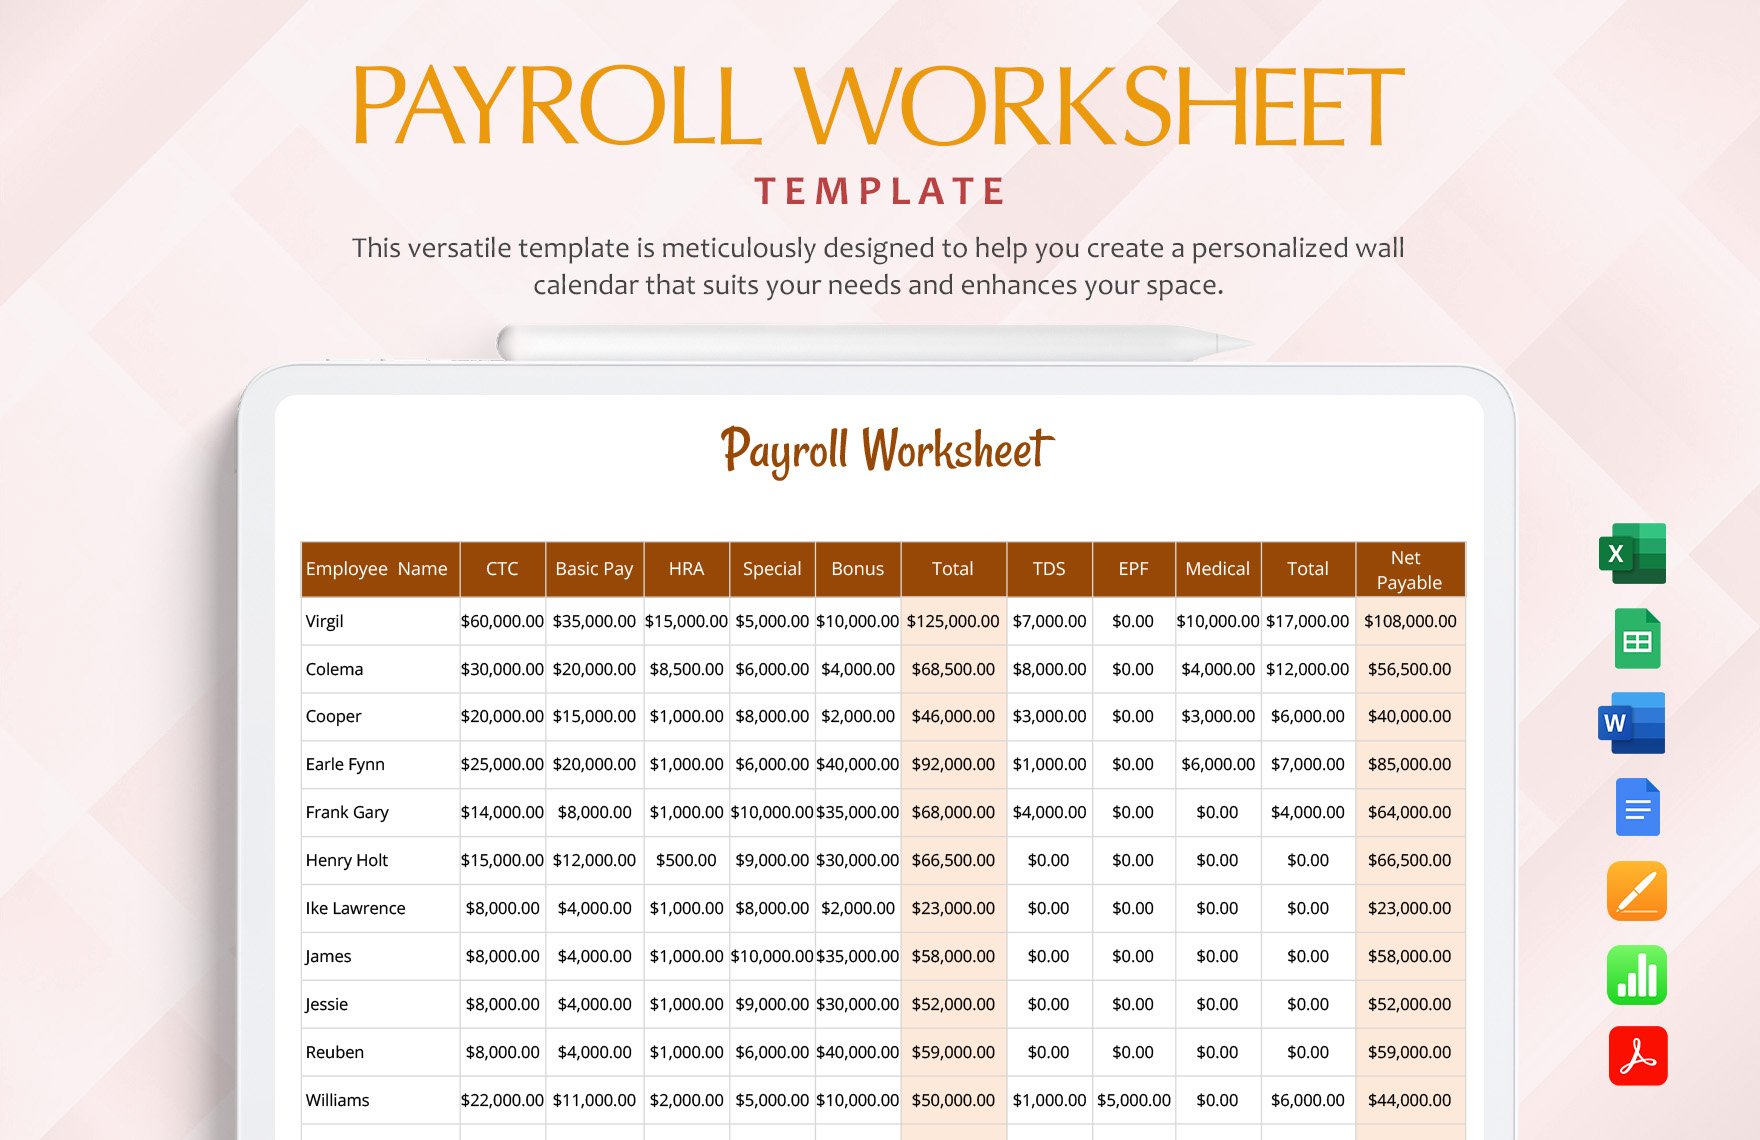 Payroll Worksheet Template in Word, Google Docs, Excel, PDF, Google Sheets, Apple Pages, Apple Numbers